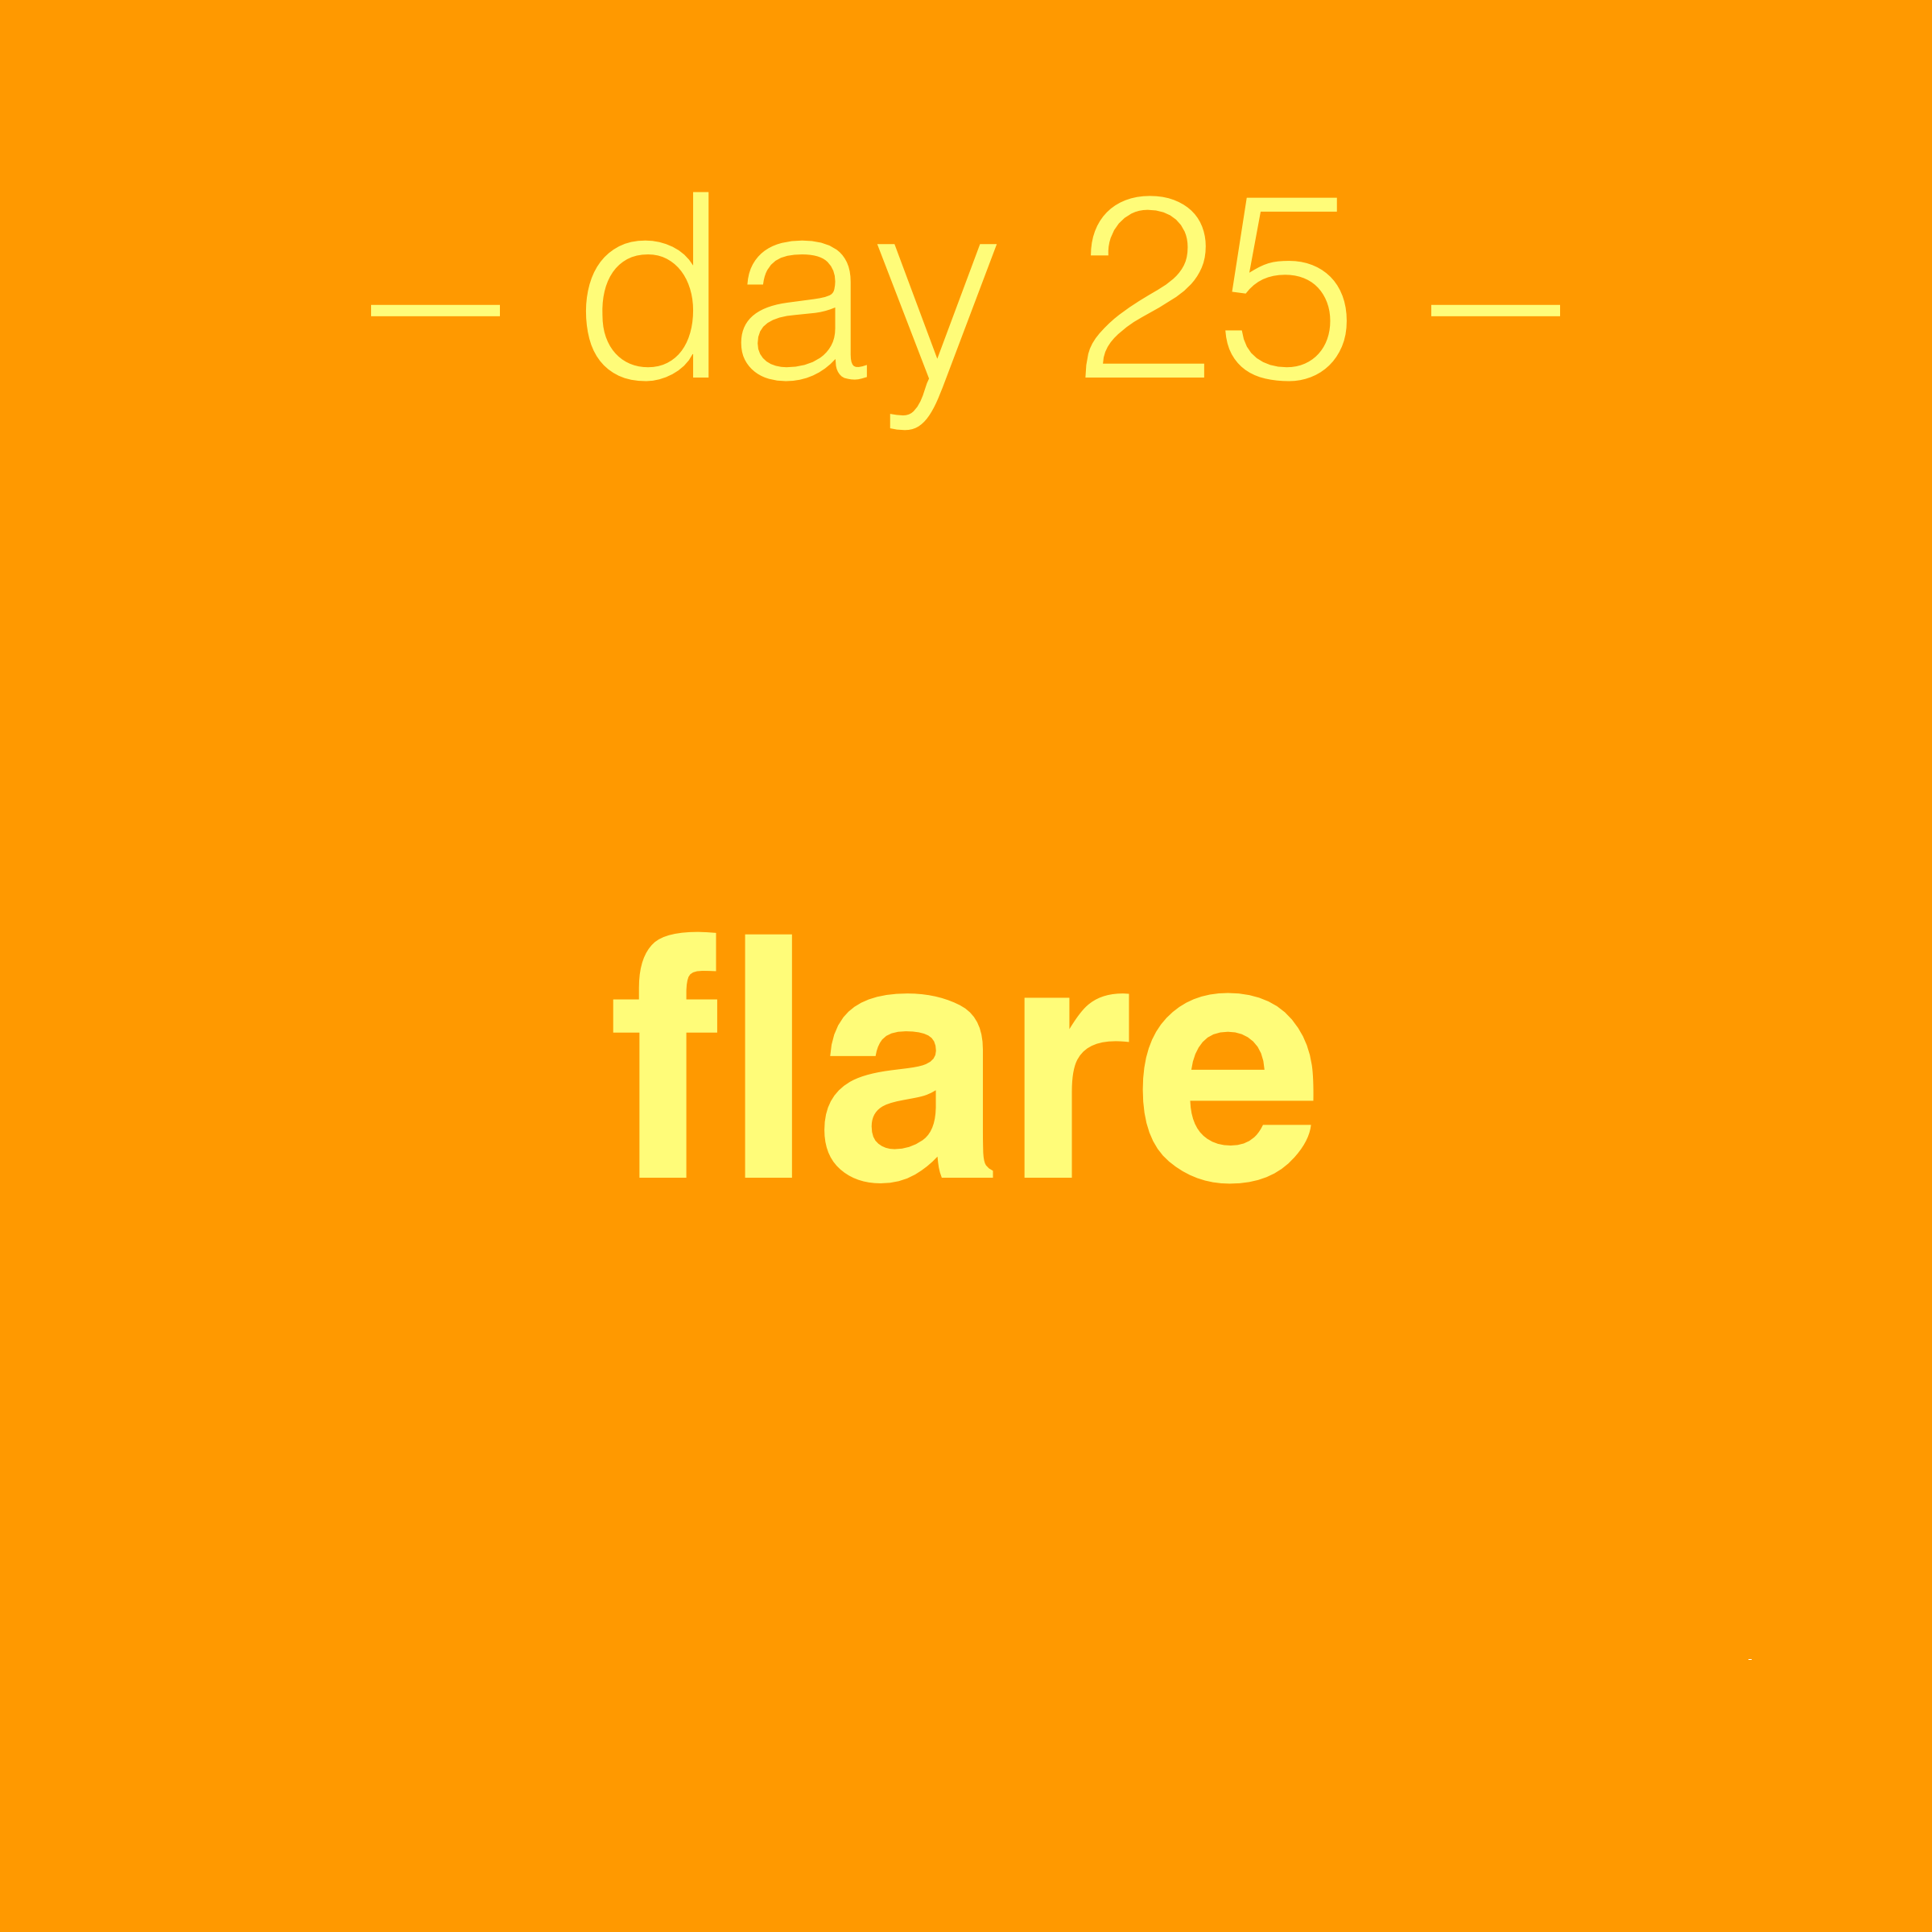 day 25 - flare